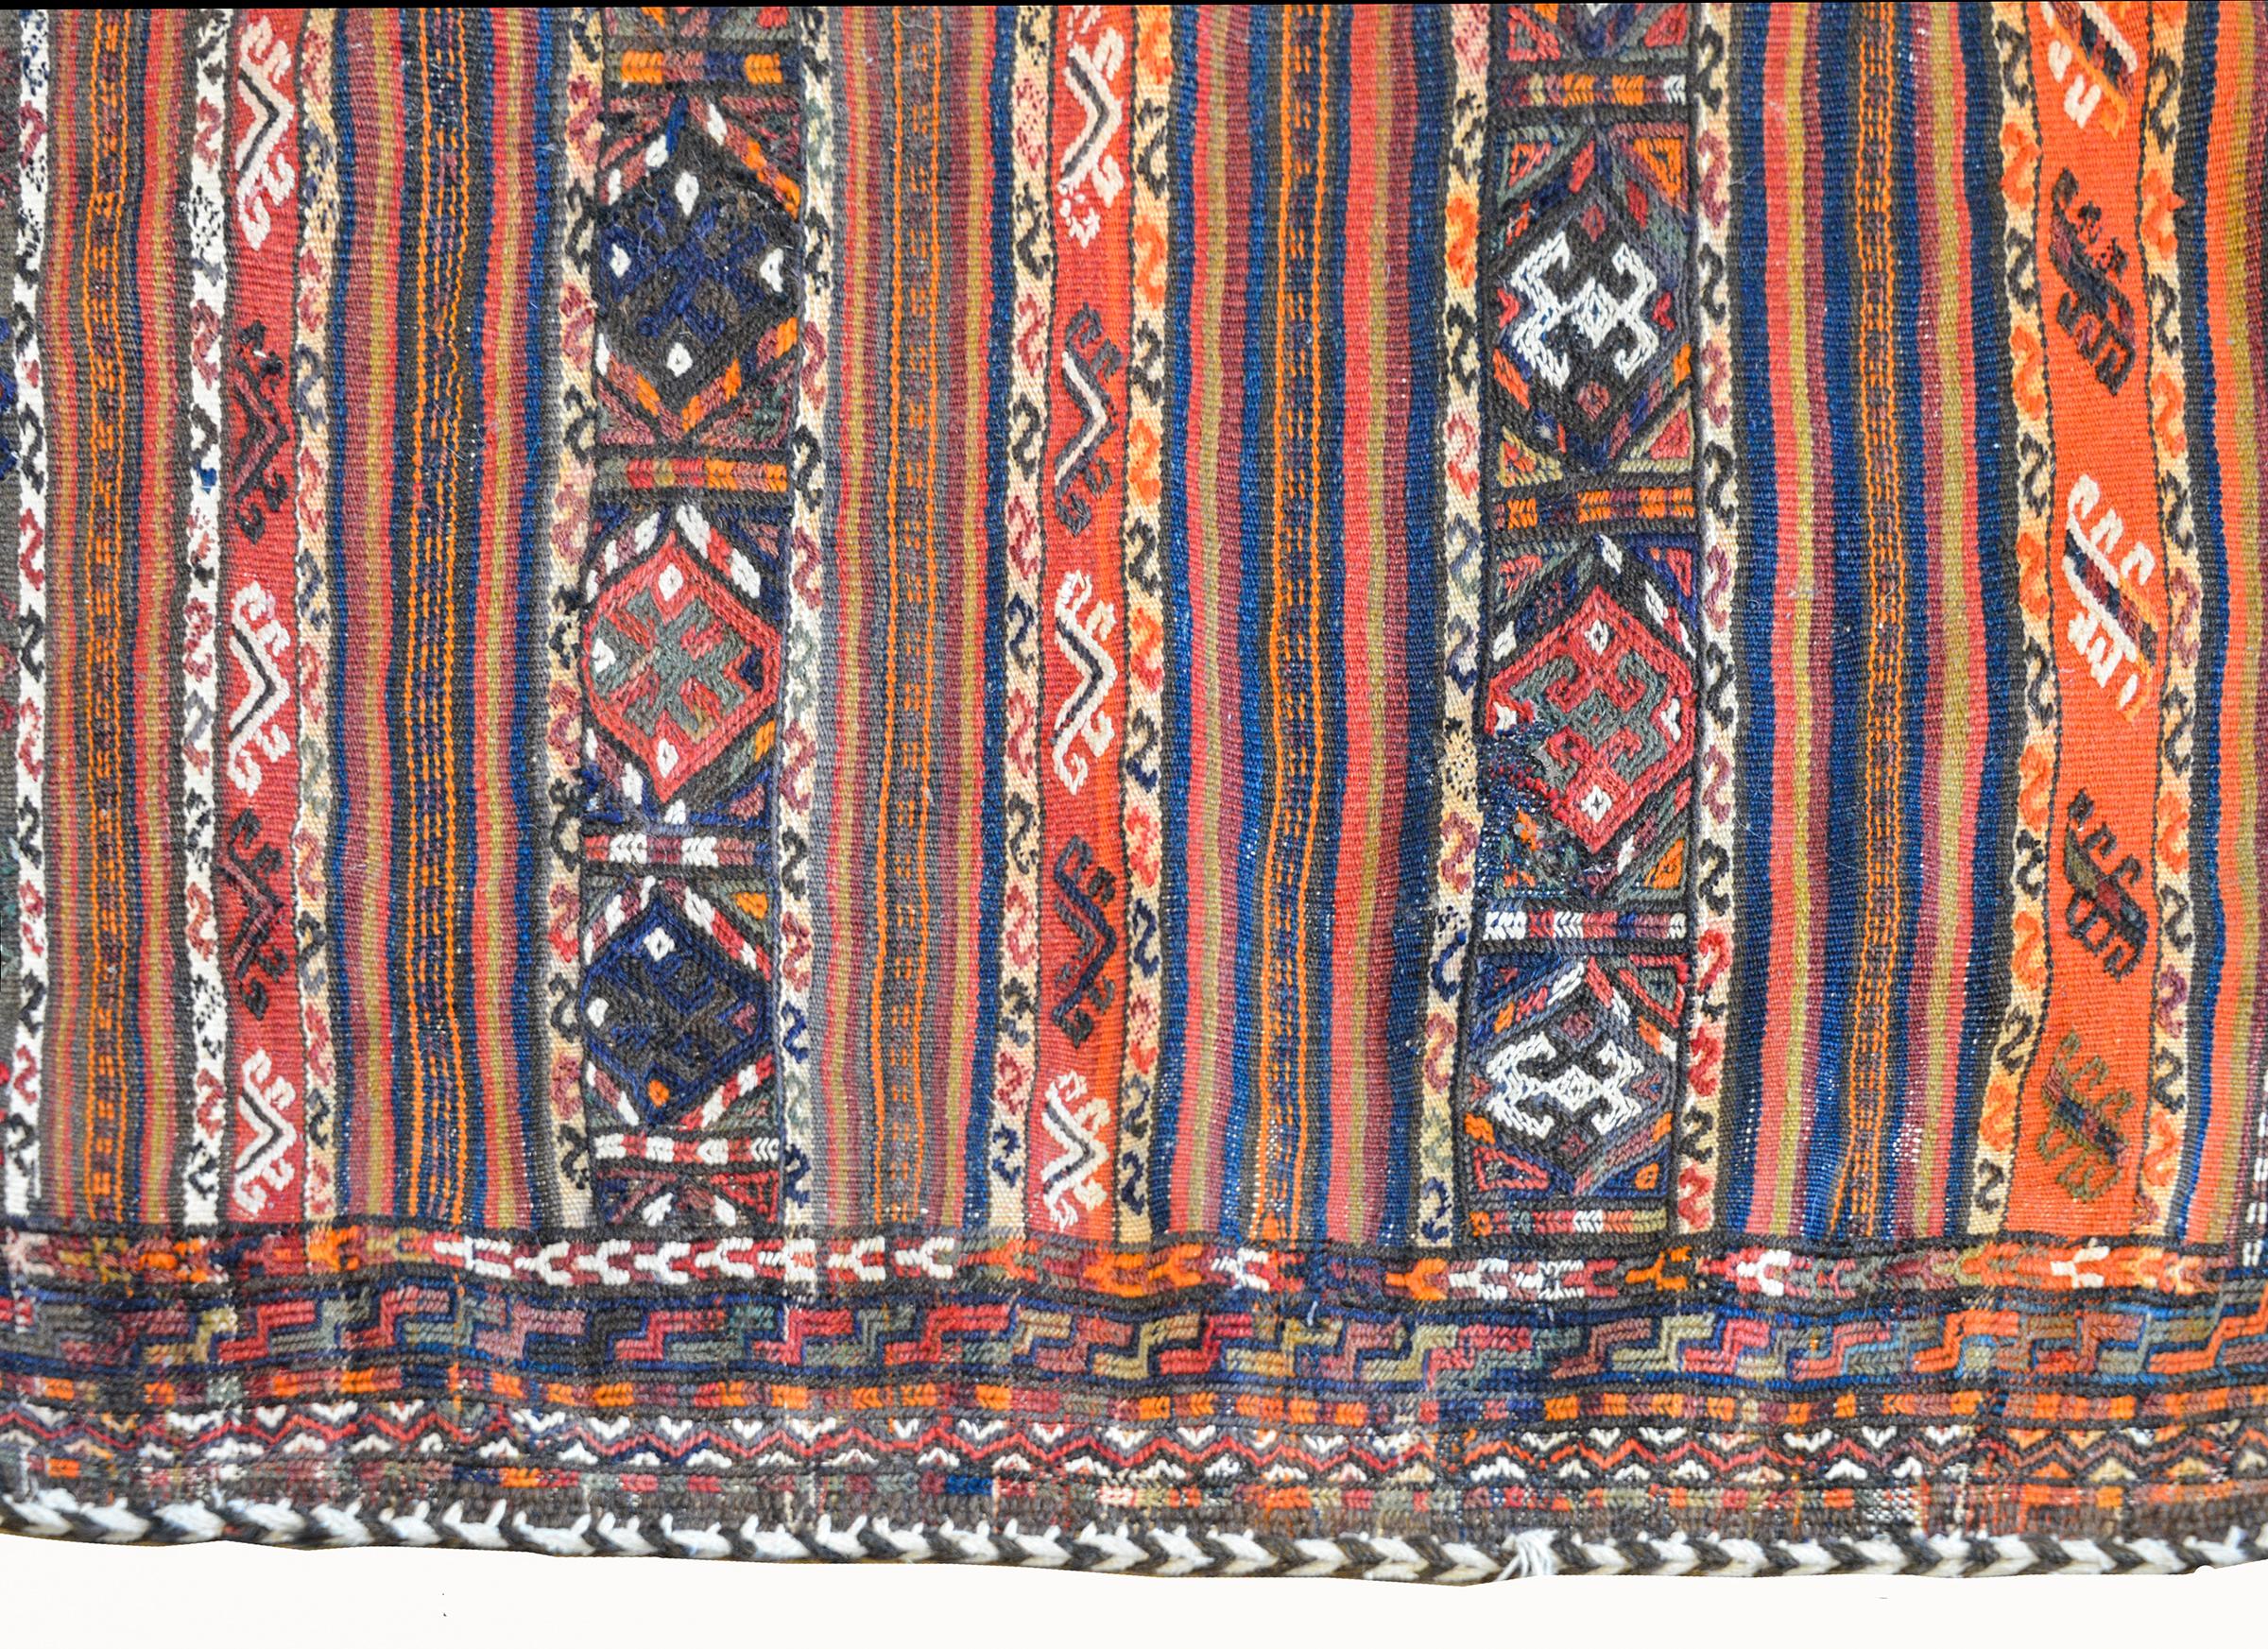 A wonderful early 20th century Persian Shahsevan bag face rug with several stylized floral patterned stripes on one side, and the reverse containing several multicolored solid stripes all woven in indigo, coral, crimson, black, and brown.